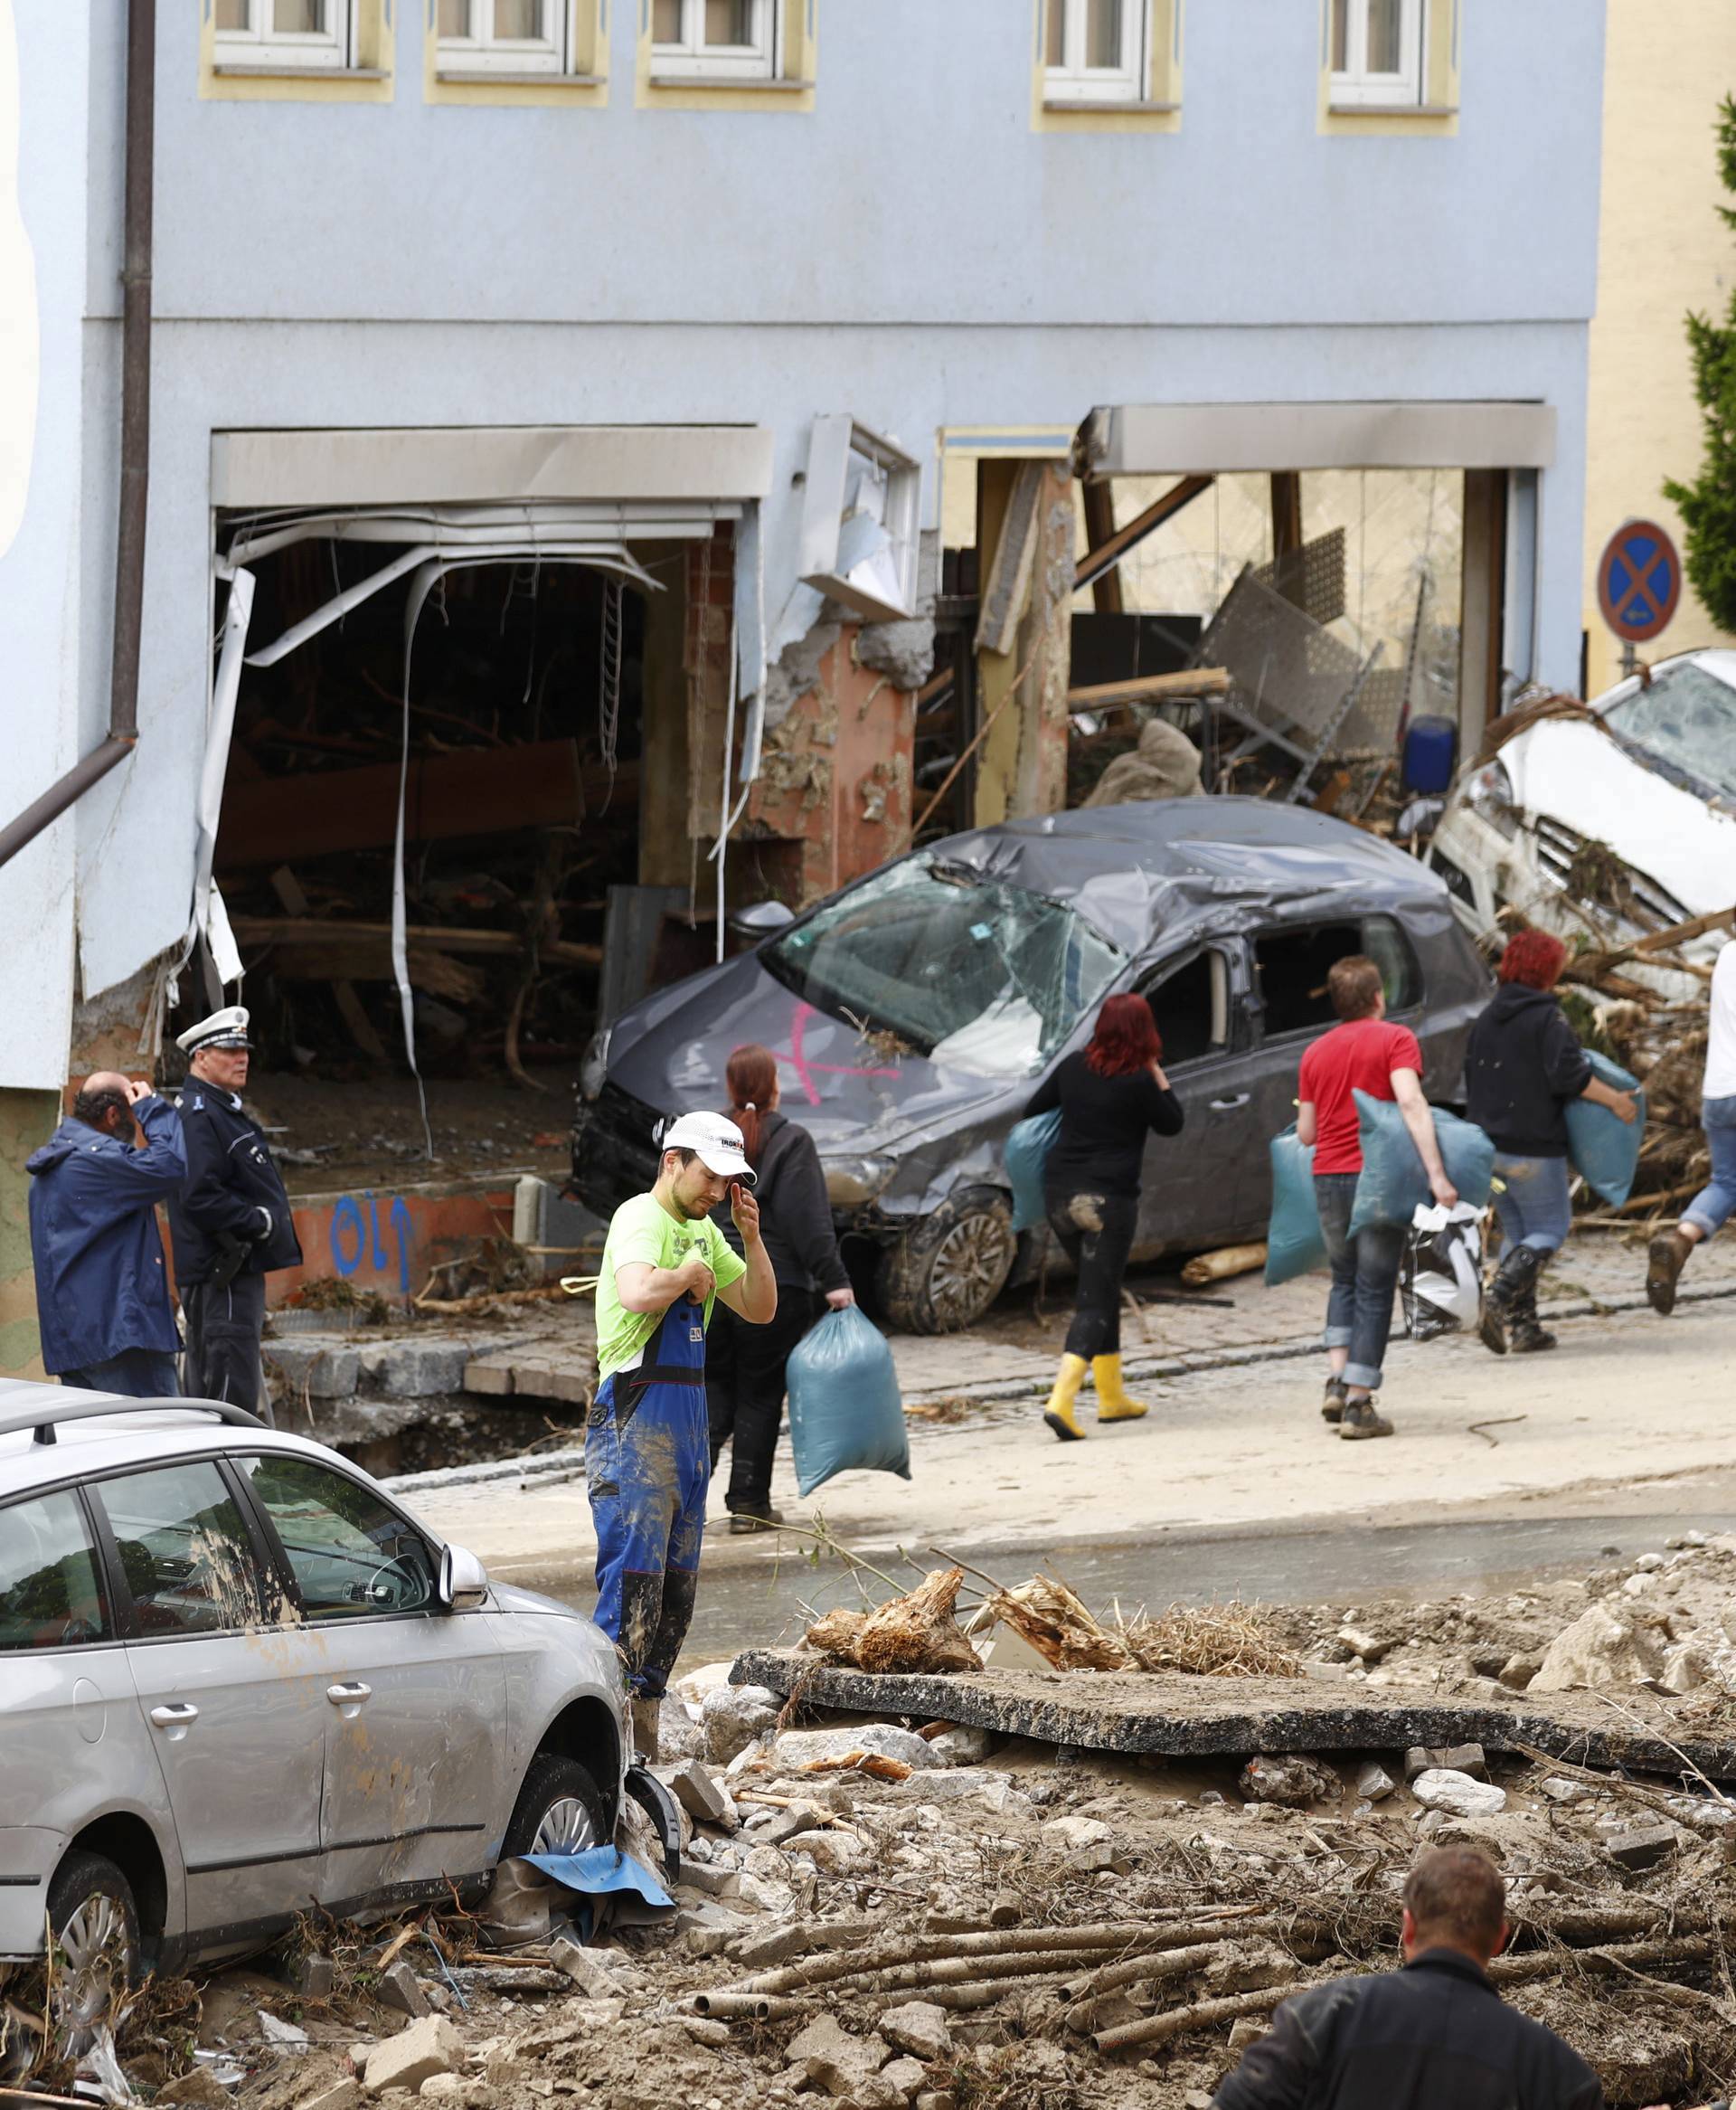 People start to clear-up debris following floods in the town of Braunsbach in Baden-Wuerttemberg